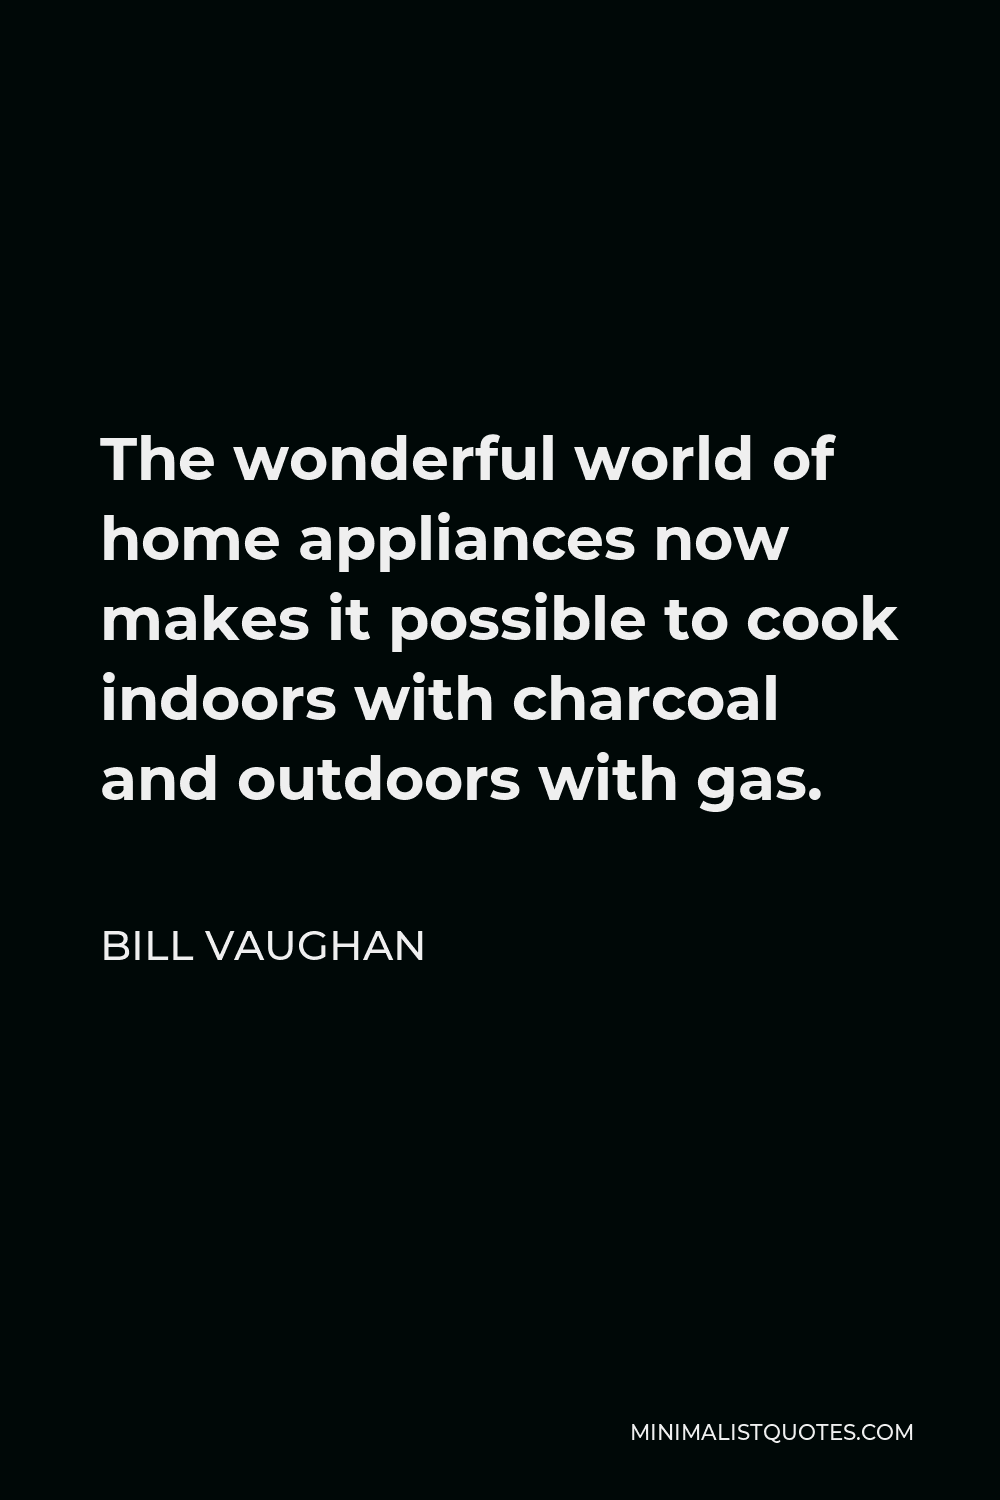 Bill Vaughan Quote - The wonderful world of home appliances now makes it possible to cook indoors with charcoal and outdoors with gas.